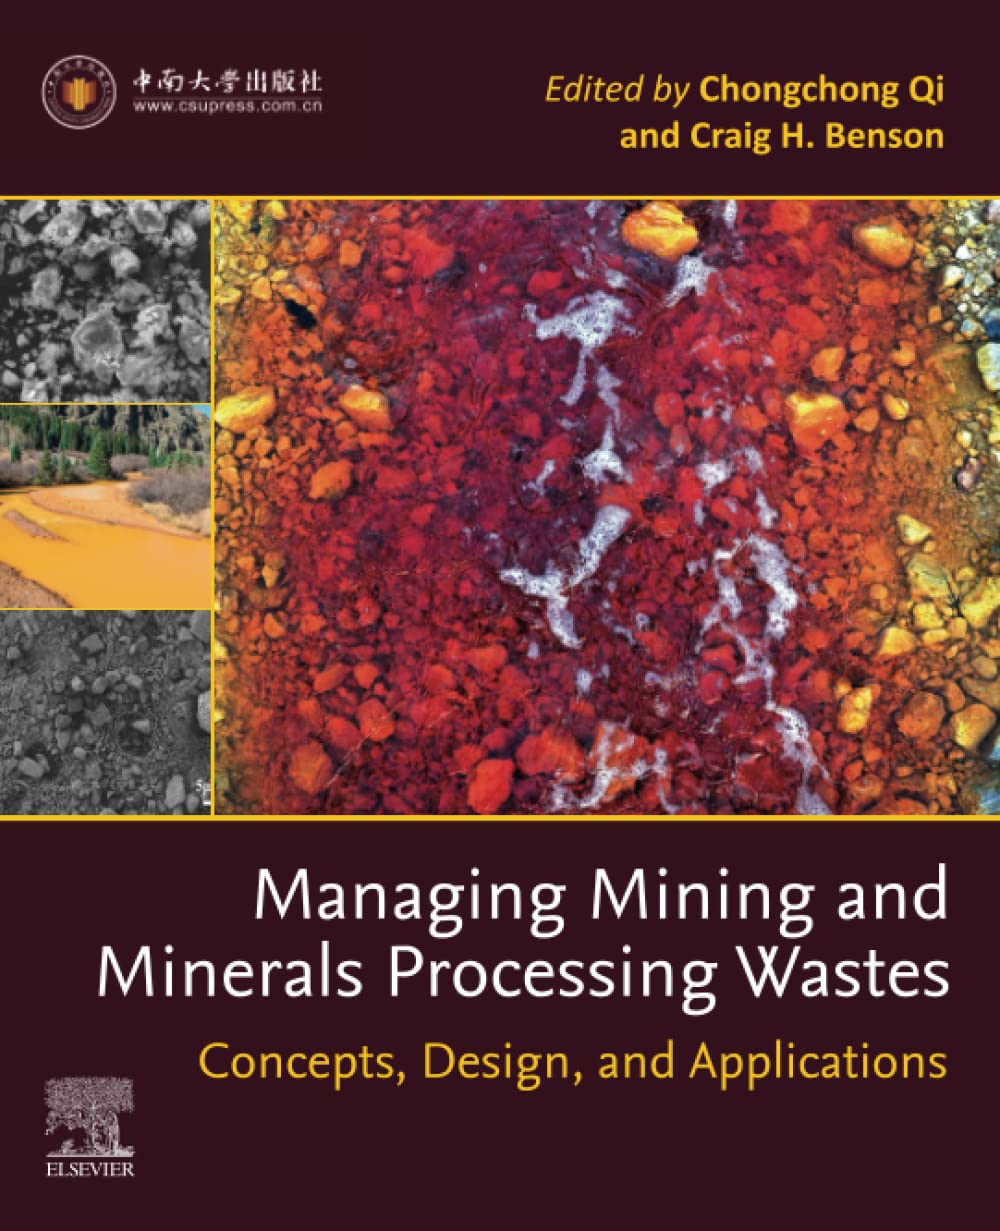 Image Managing Mining and Minerals Processing Wastes : Concepts, Design, and Applications